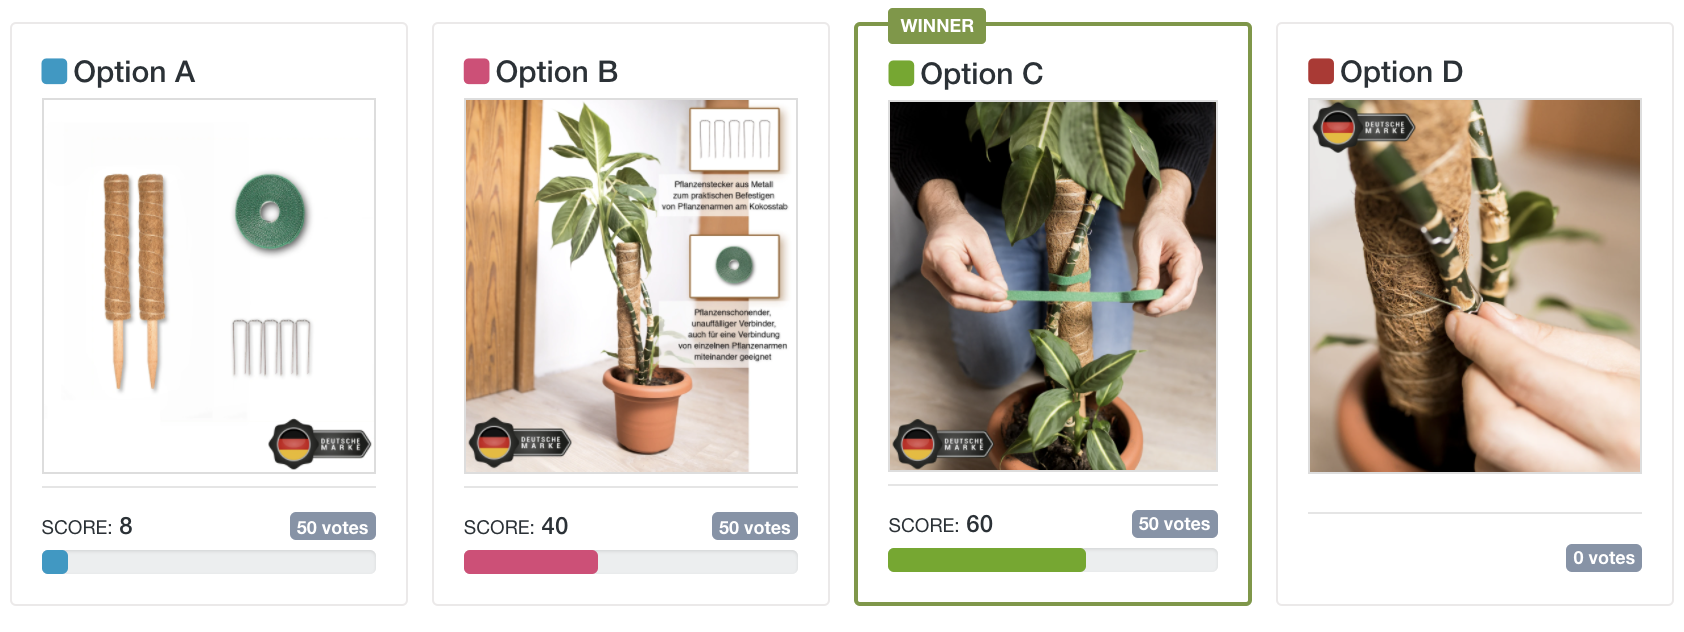 Which One Won: first set of gardening products image test options